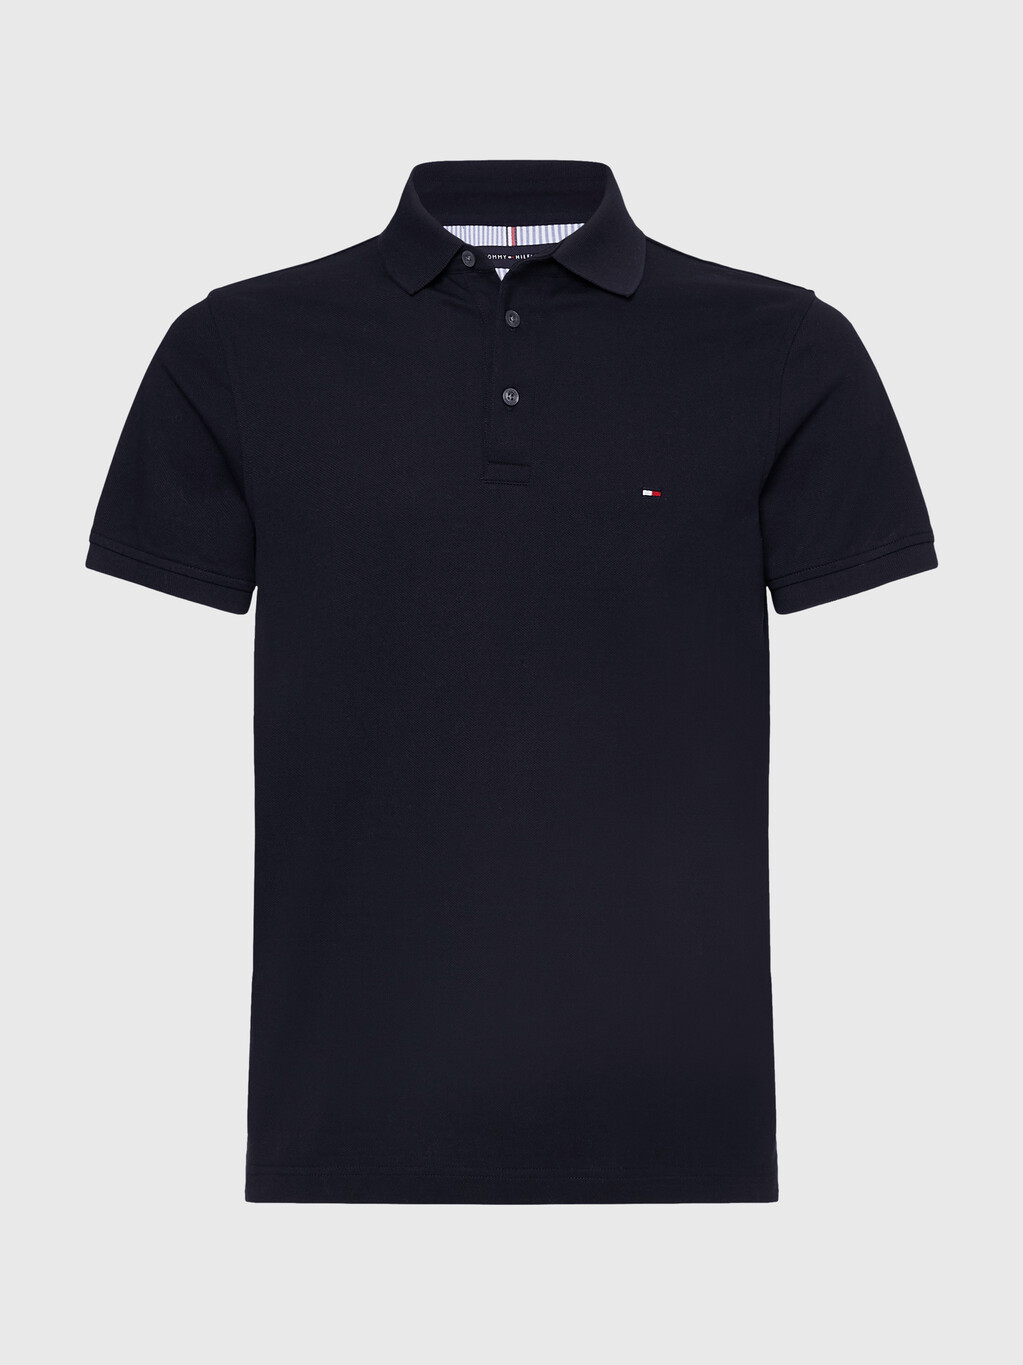 1985 Collection Organic Cotton Slim Fit Polo, Desert Sky, hi-res